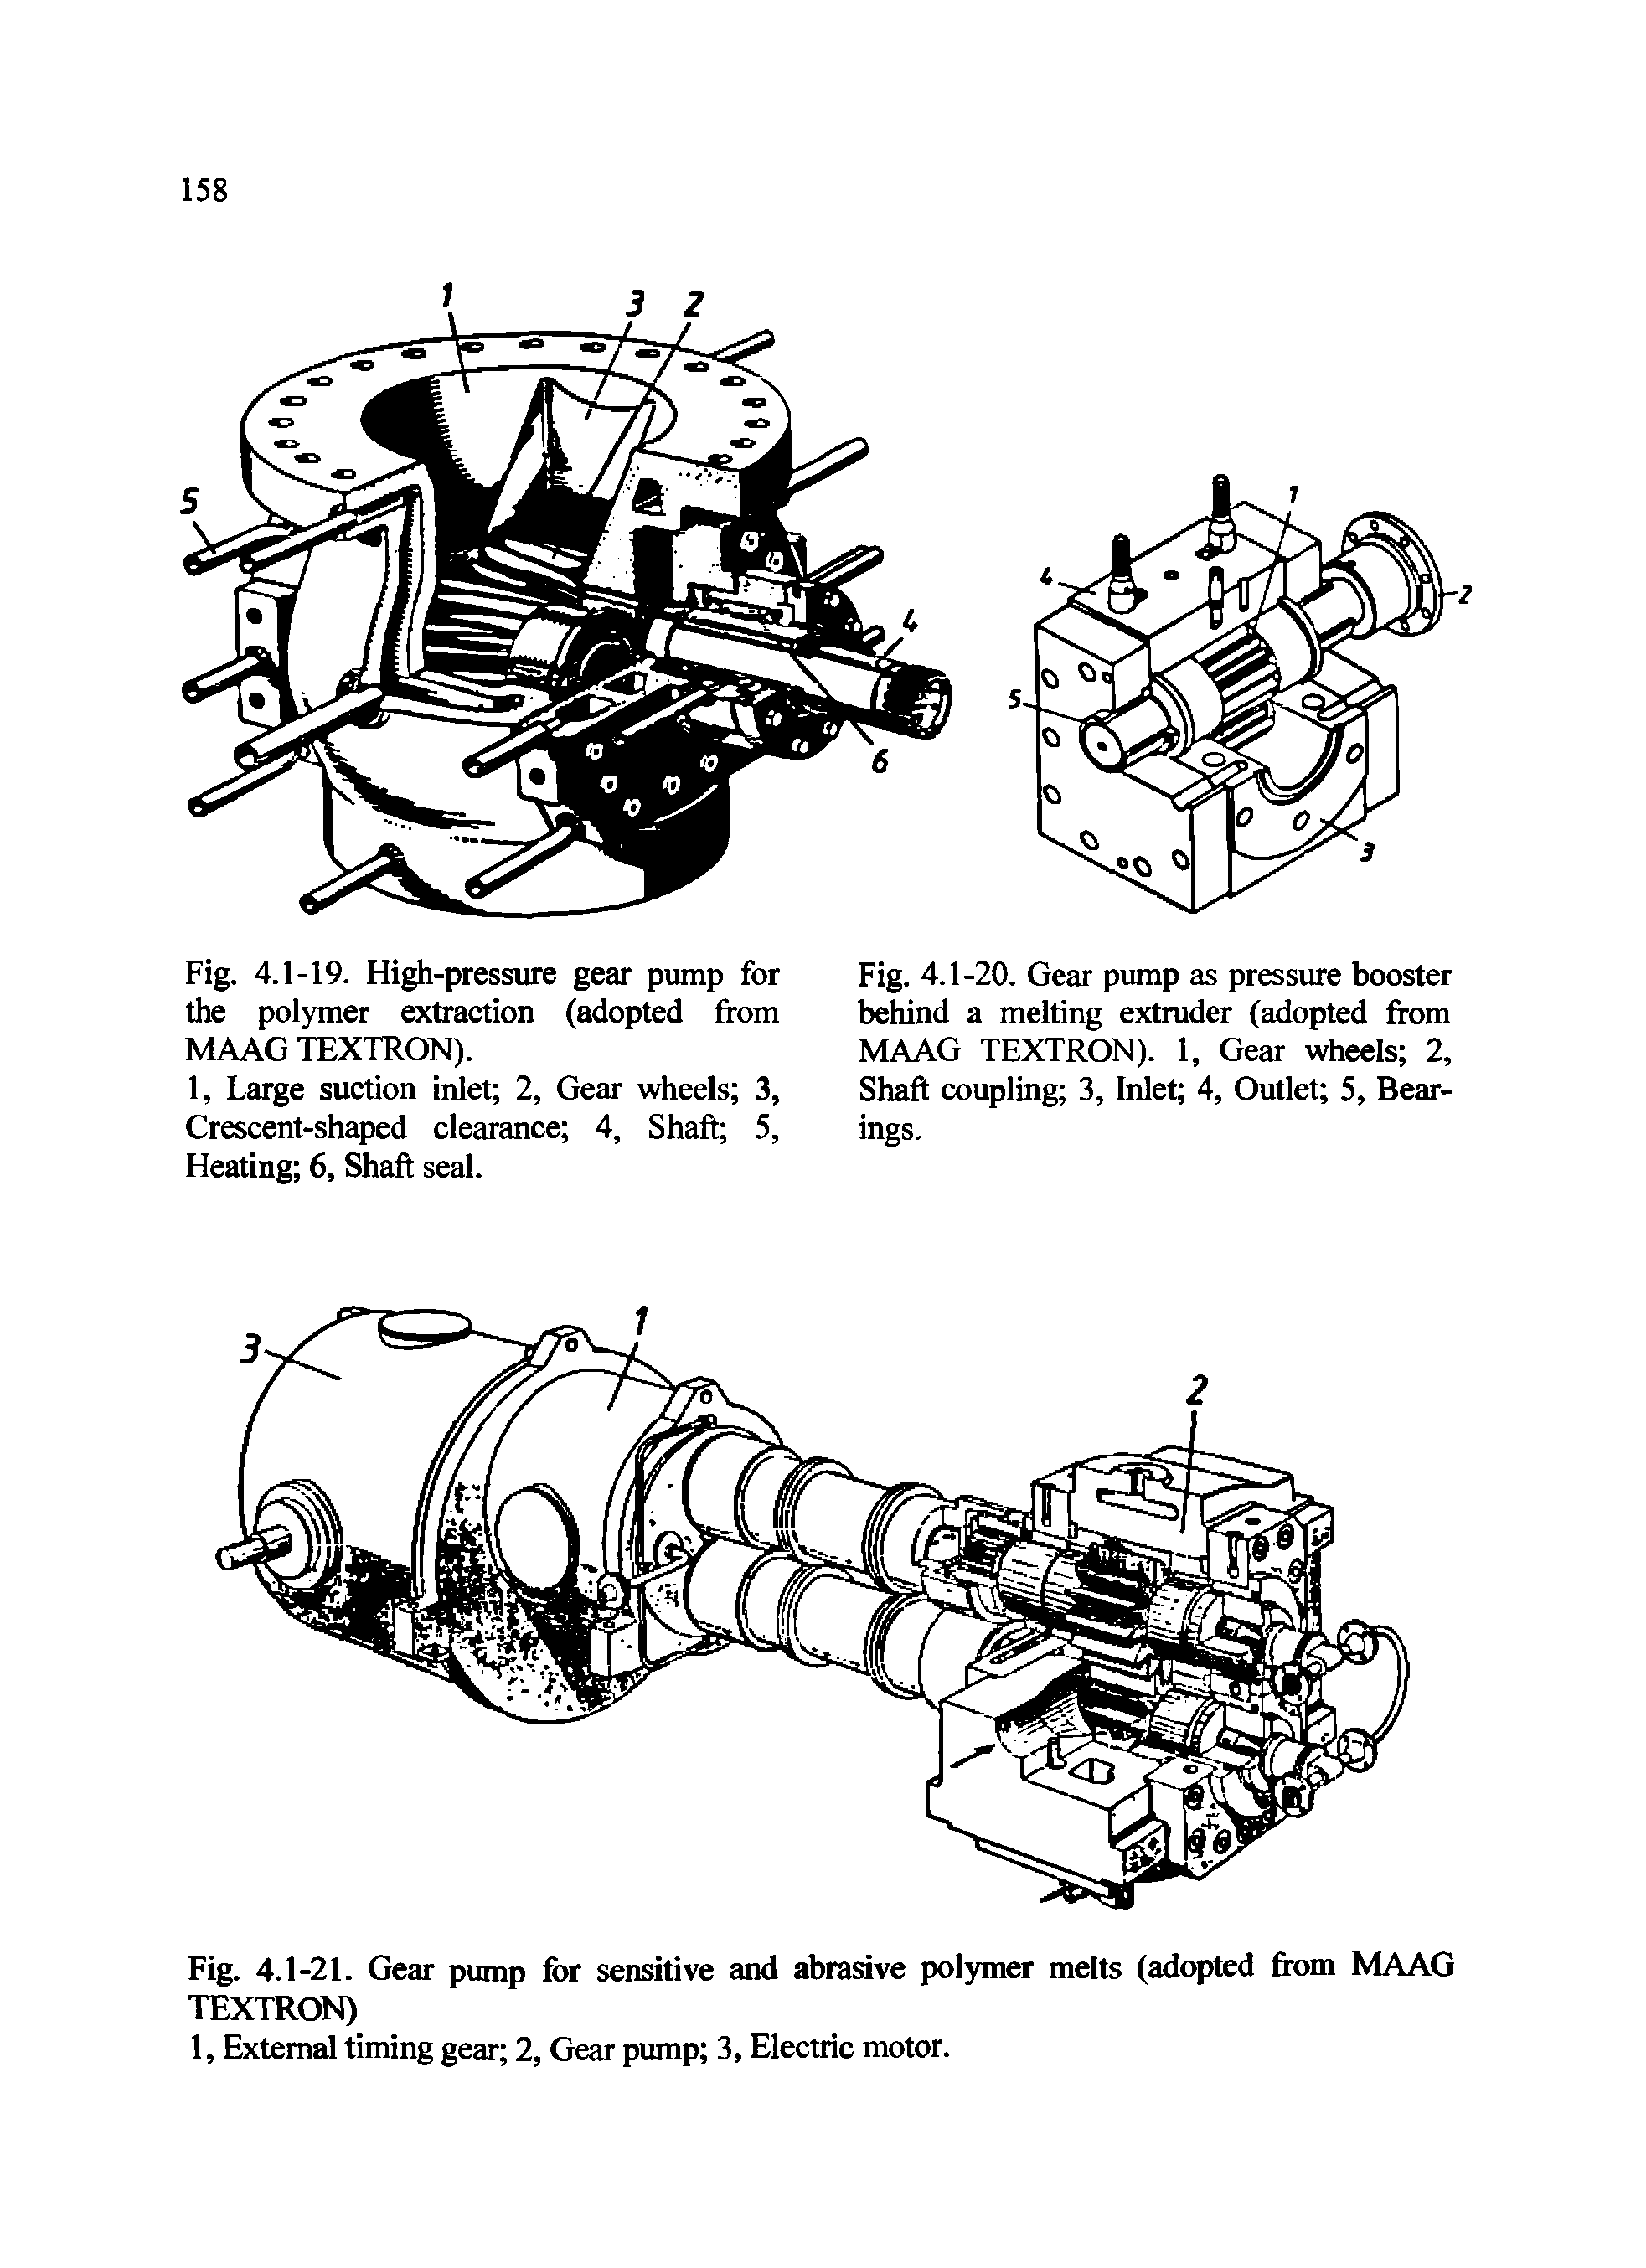 Fig. 4.1-20. Gear pump as pressure booster behind a melting extruder (adopted from MAAG TEXTRON). 1, Gear wheels 2, Shaft coupling 3, Inlet 4, Outlet 5, Bearings.